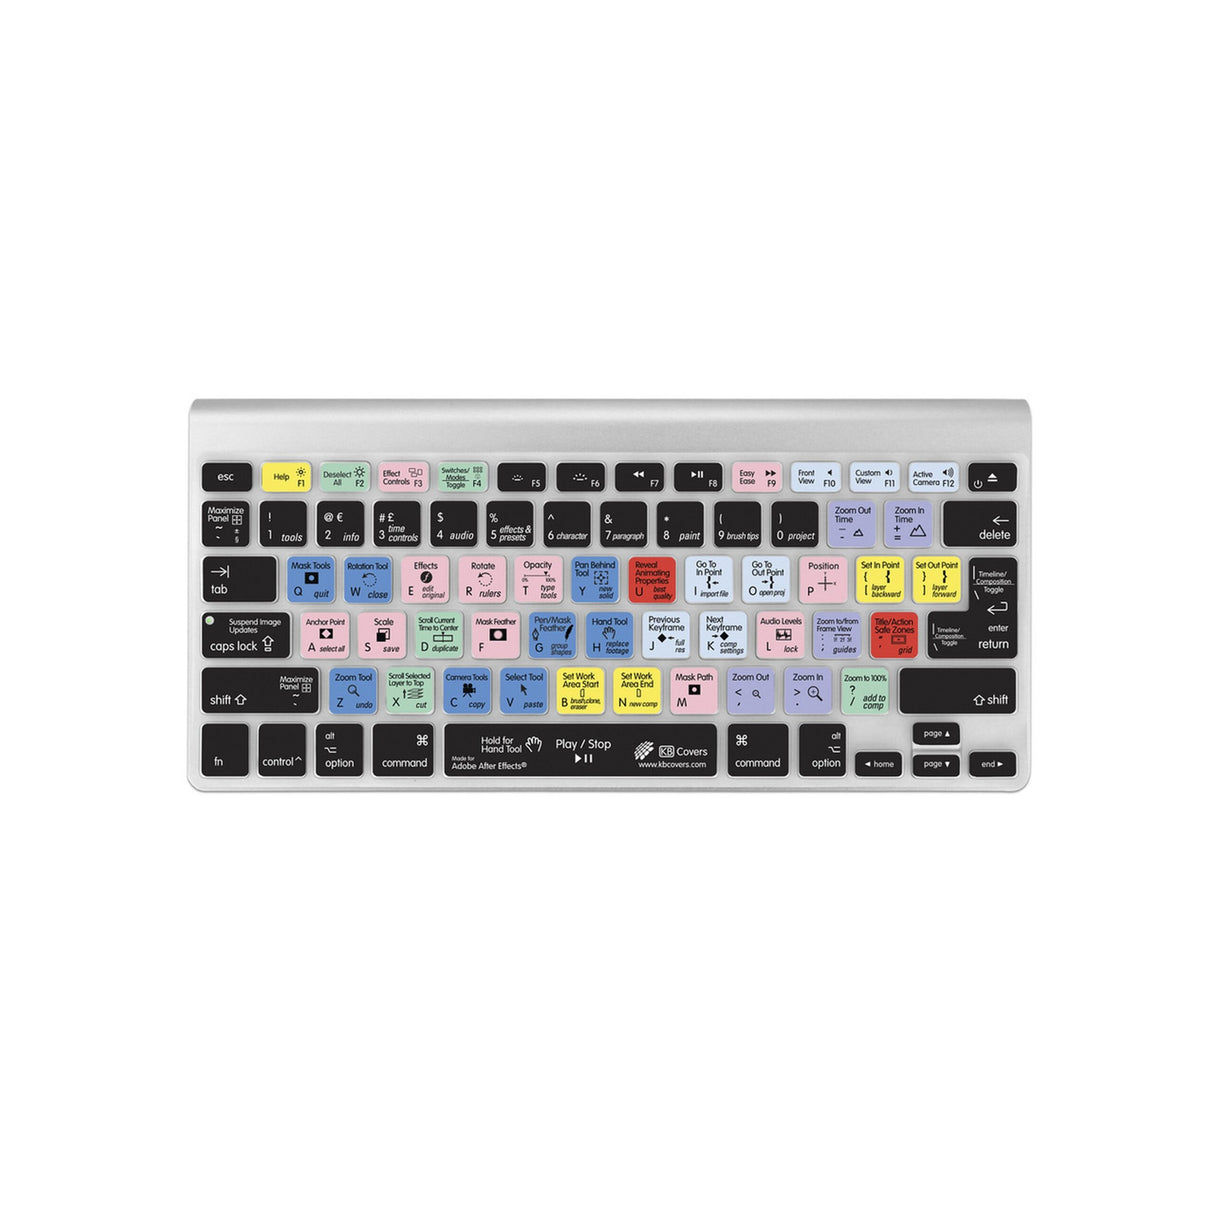 KB Covers AE-M-CC-2 After Effects Keyboard Cover for MacBook/Air 13/Pro 2008+/Retina and Wireless